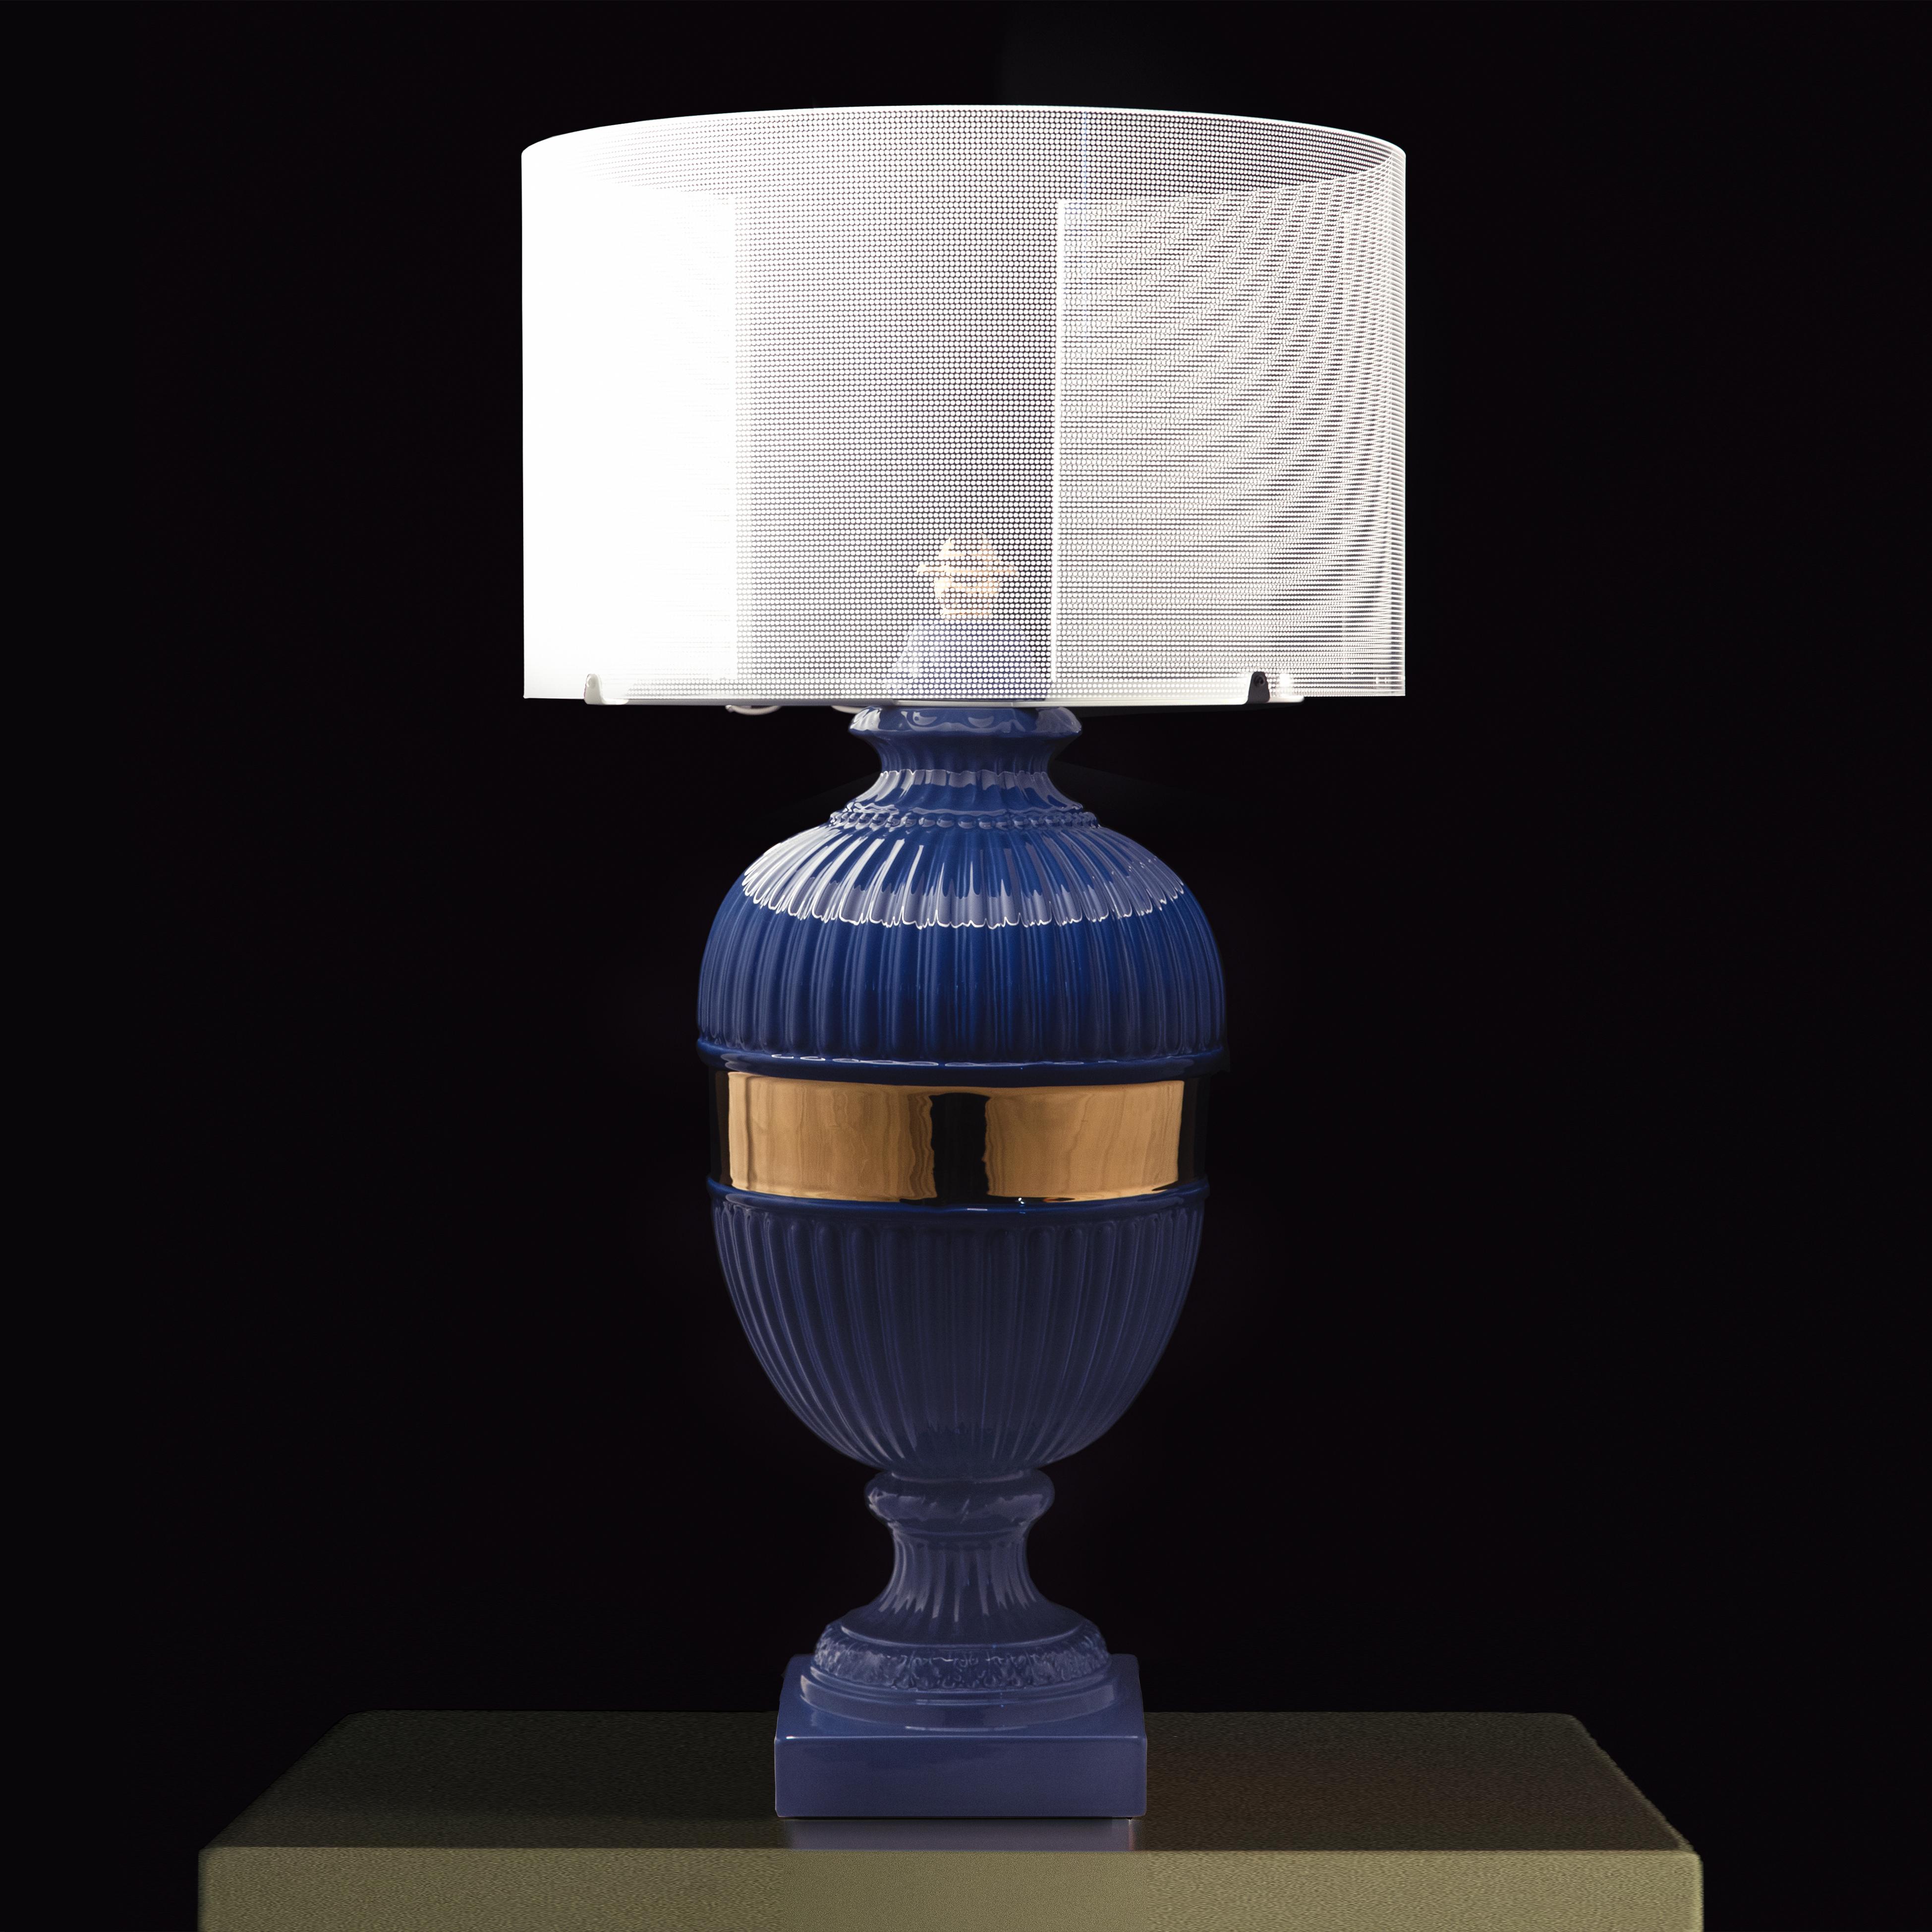 Inspired by the Classical urns from the frescoes in the Hall of Cupid and Psyche in Mantova’s Palazzo Te, this table lamp will stand out in any kind of décor, with its fine ceramic and timelessly elegant shape. The innovative touch technology is